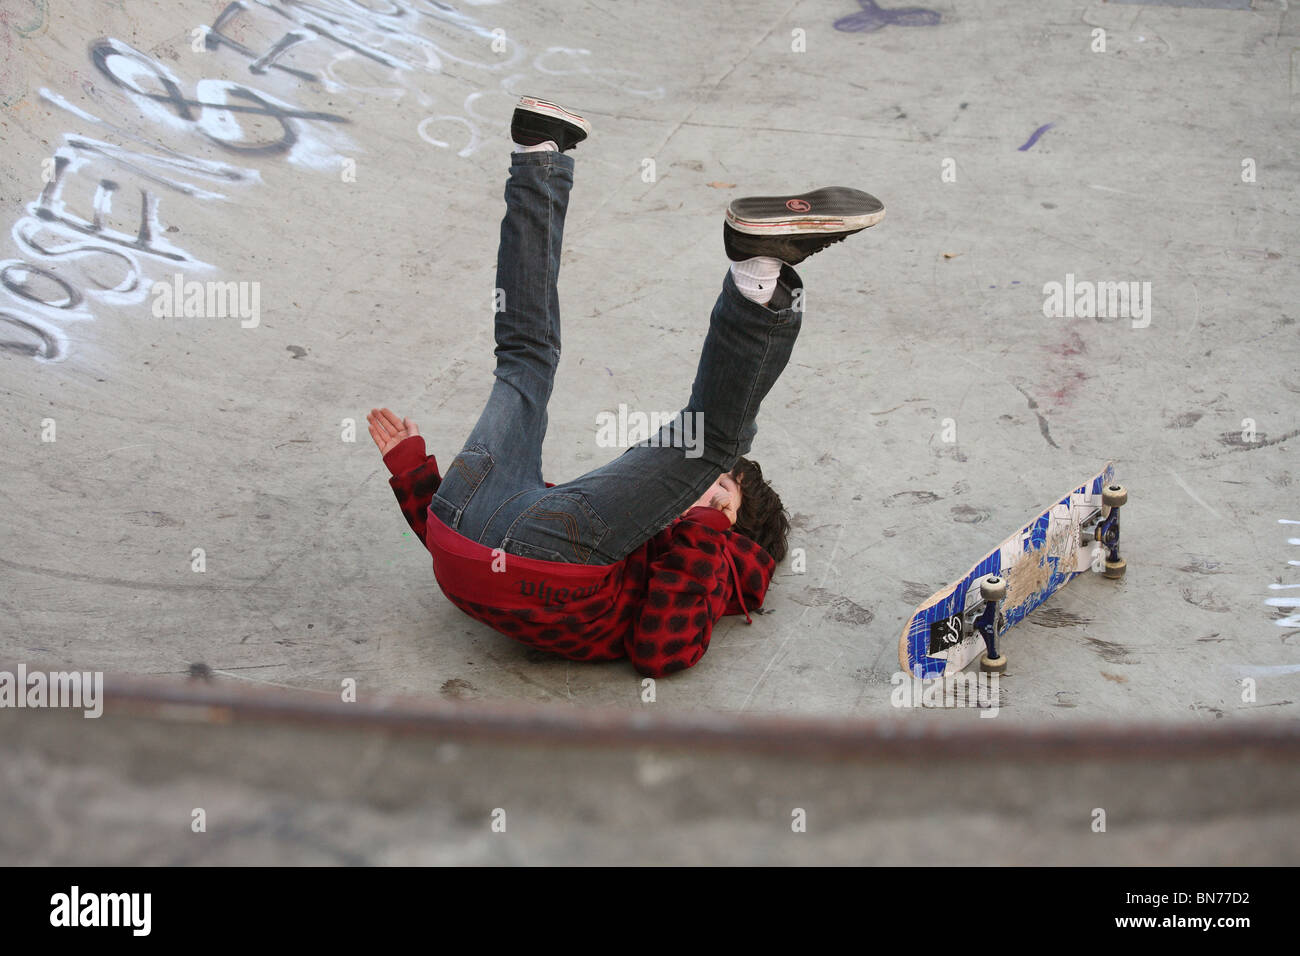 Young skateboarder in a halfpipe, Bremen, Germany Stock Photo